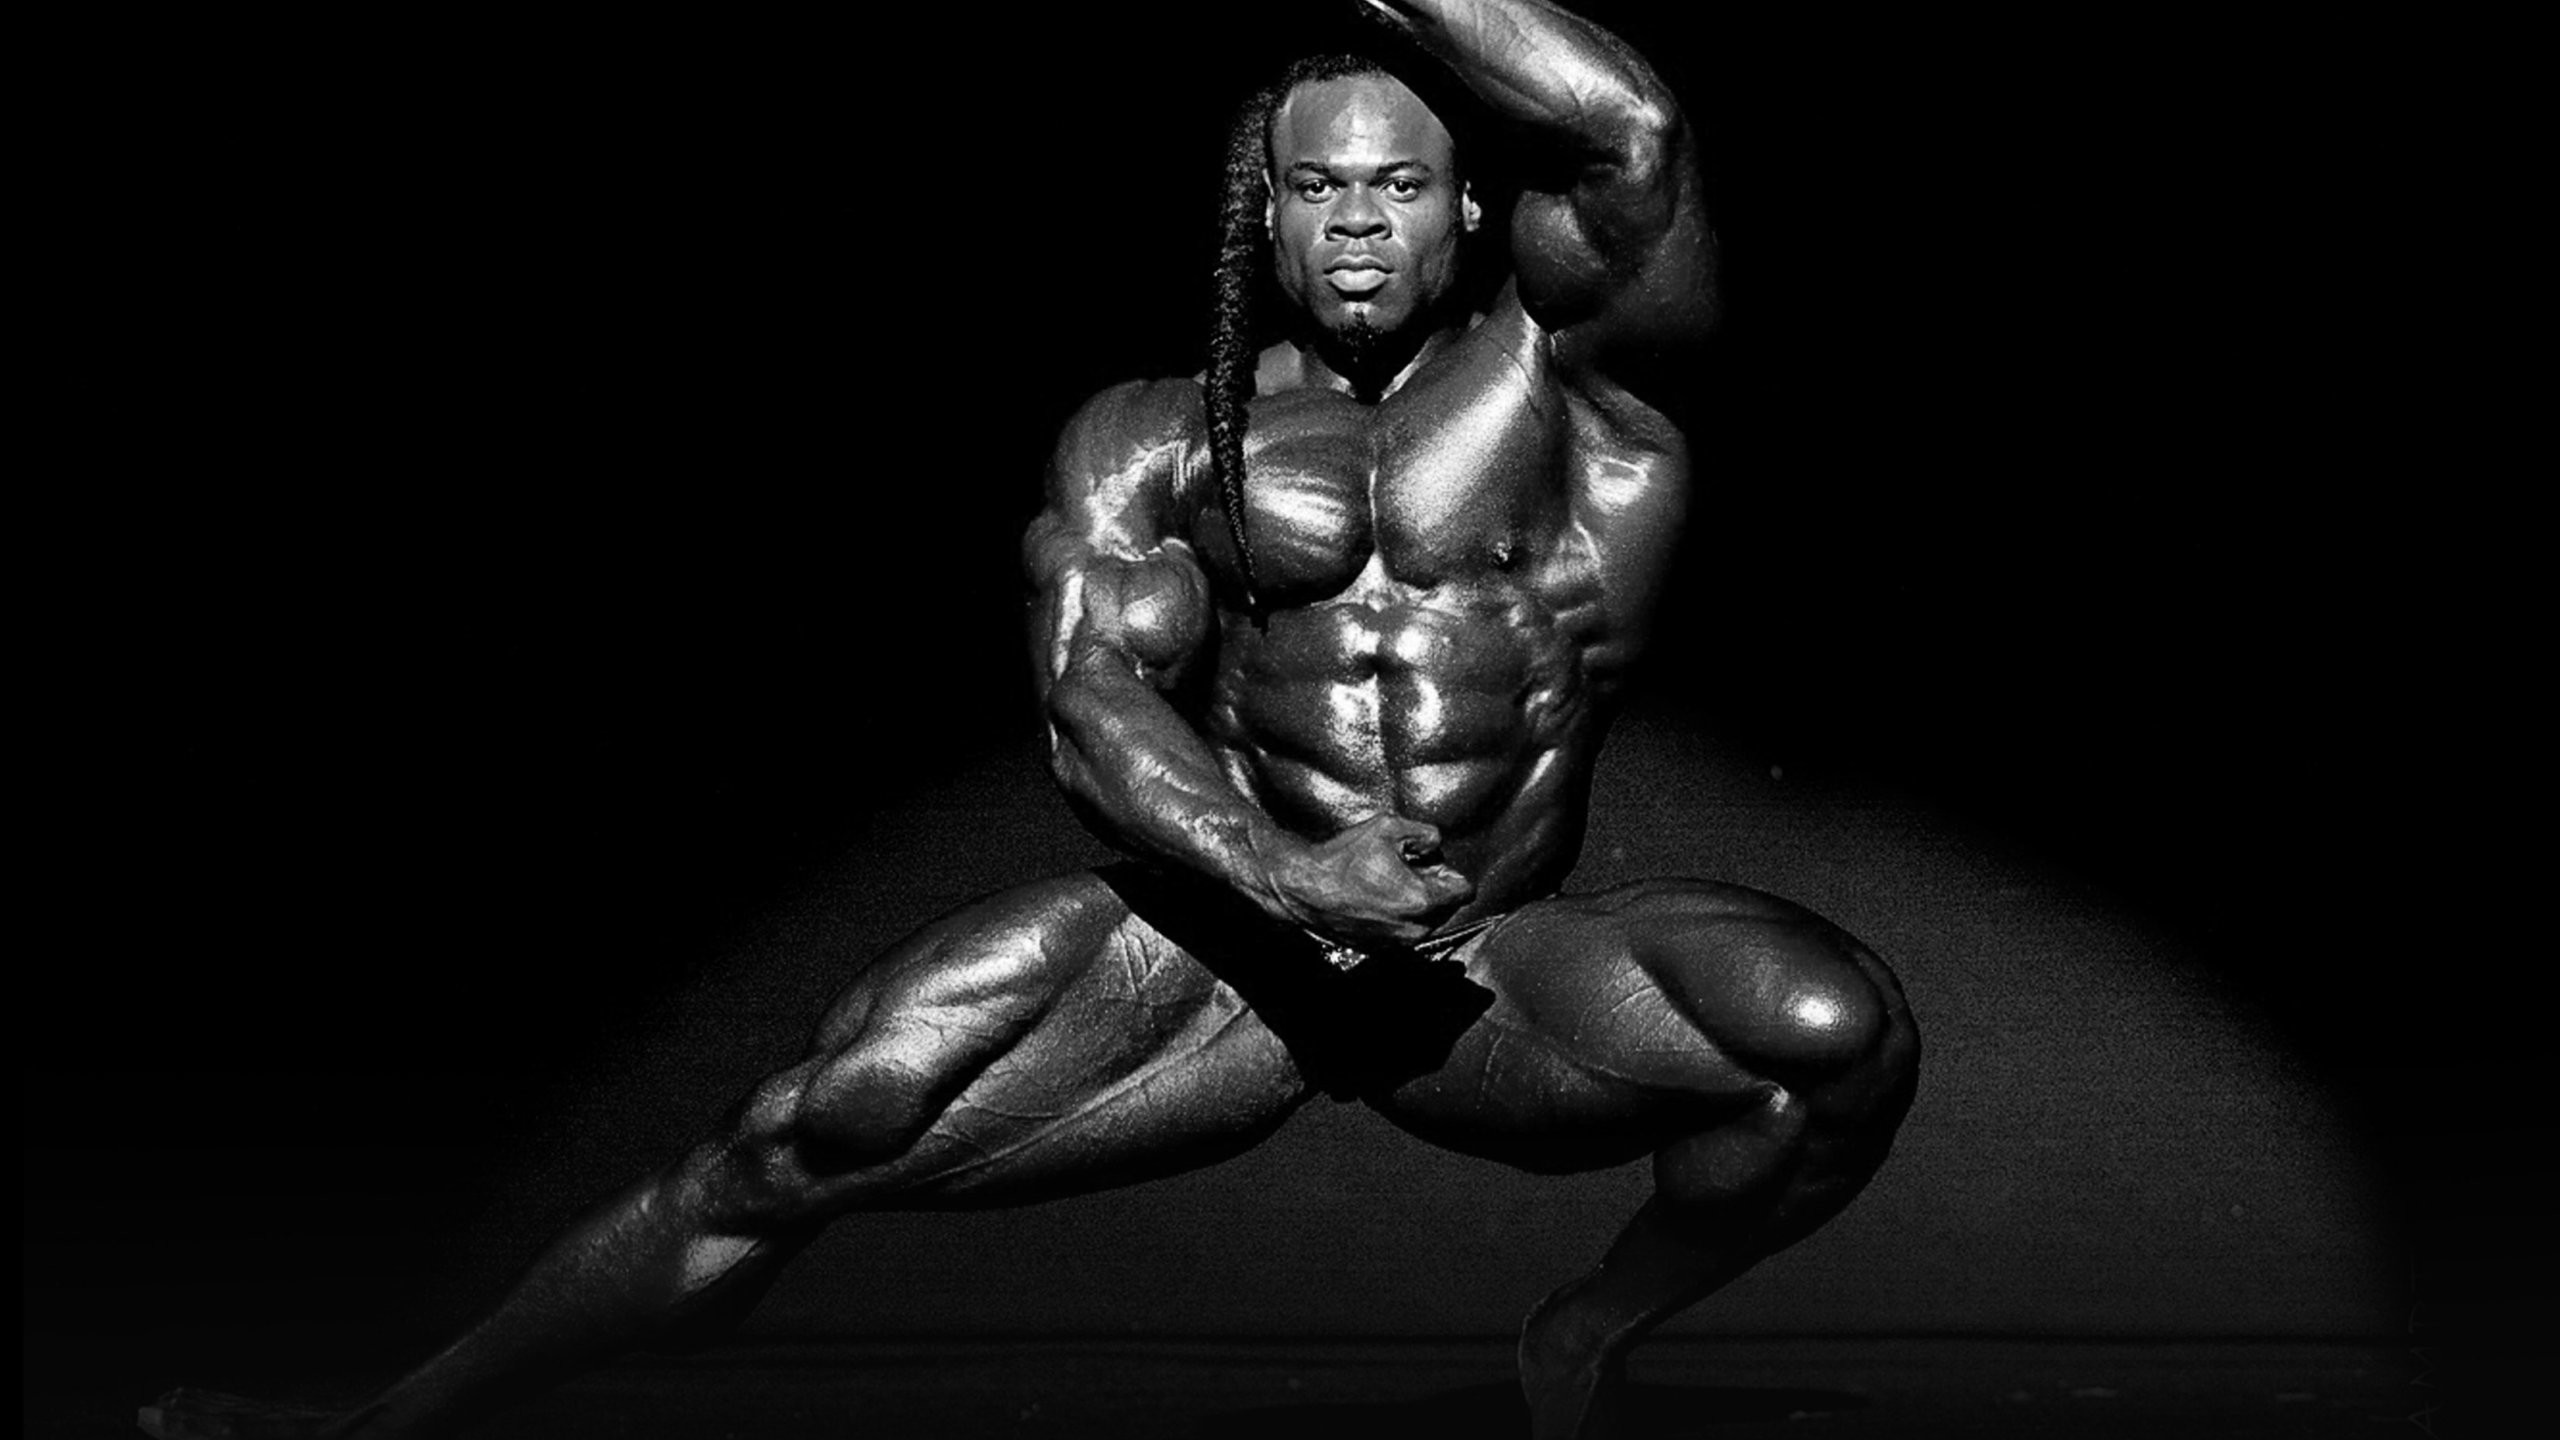 2560x1440 Gallery of Arnold Bodybuilding Pictures Wallpapers Free Wallpaper...